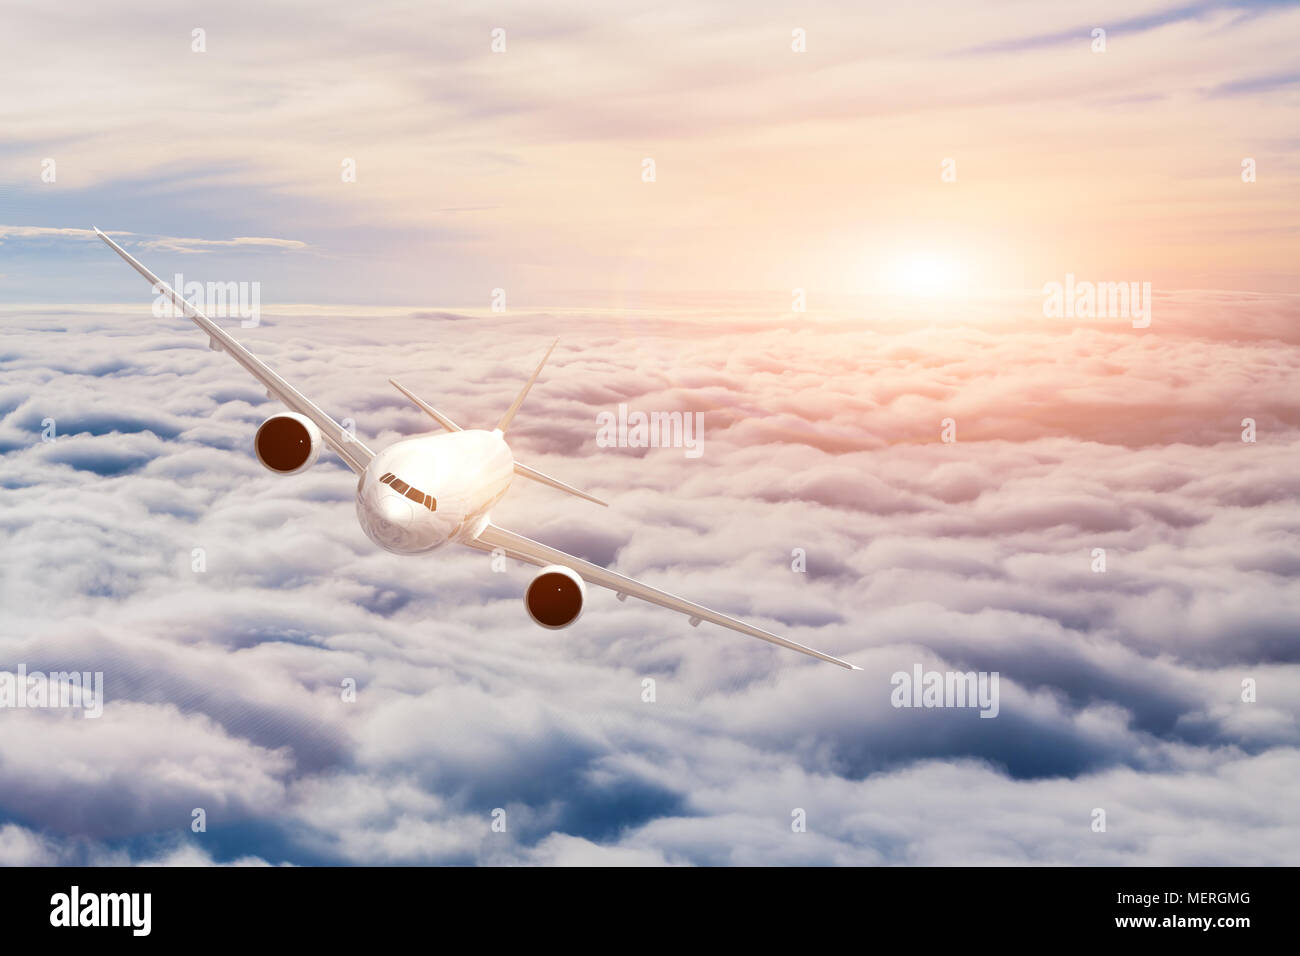 Airplane in cruise flight above the clouds. Beautiful sky, sunset light and reflection on the flying aircraft. Concept about air travel Stock Photo